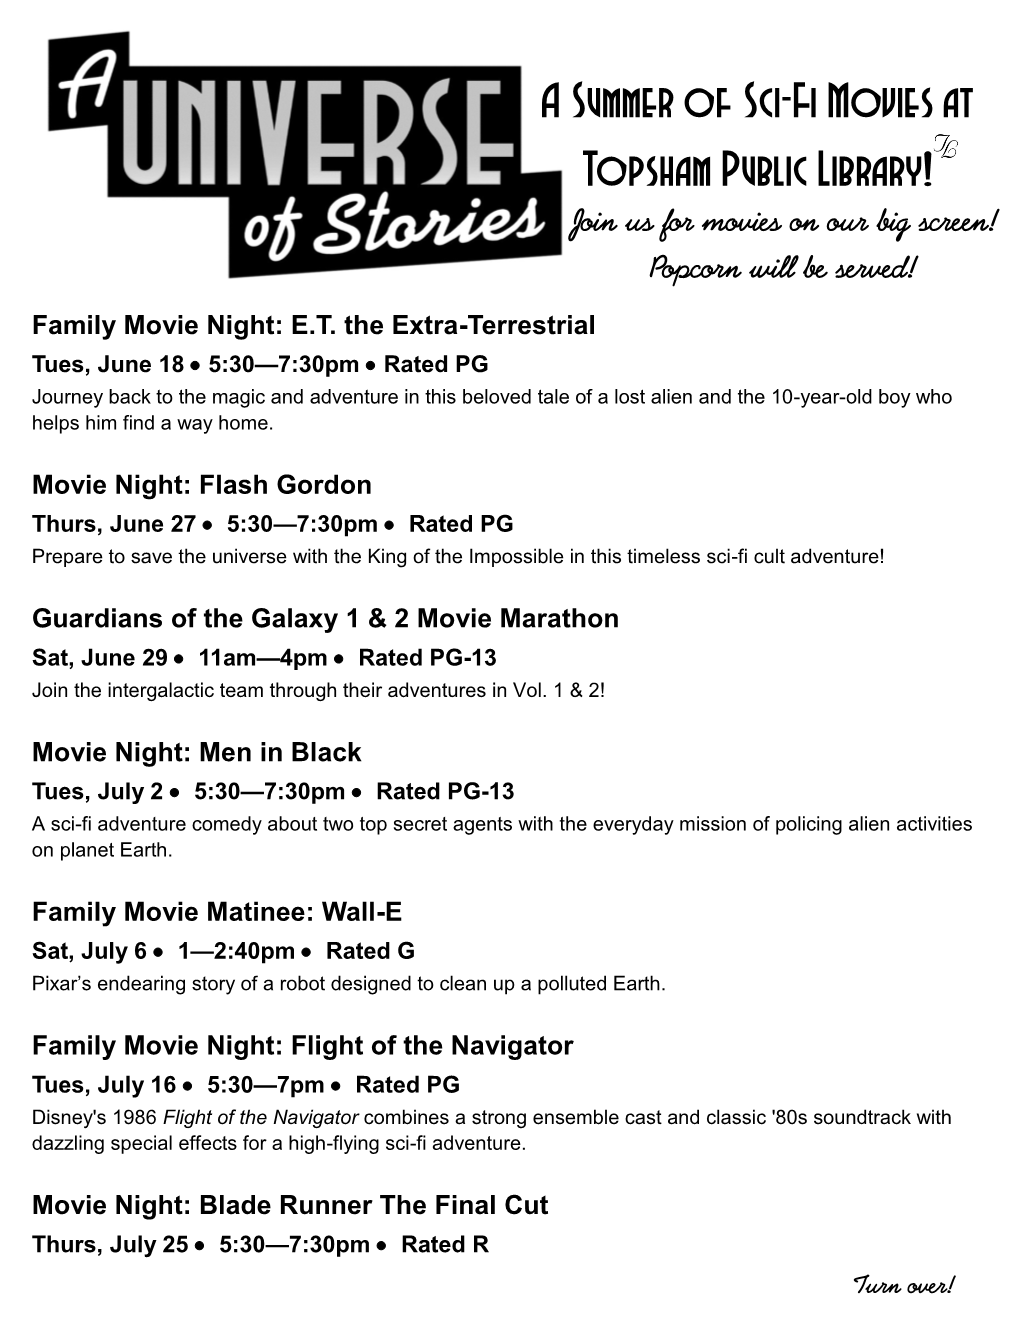 A Summer of Sci-Fi Movies at Topsham Public Library! Join Us for Movies on Our Big Screen! Popcorn Will Be Served!